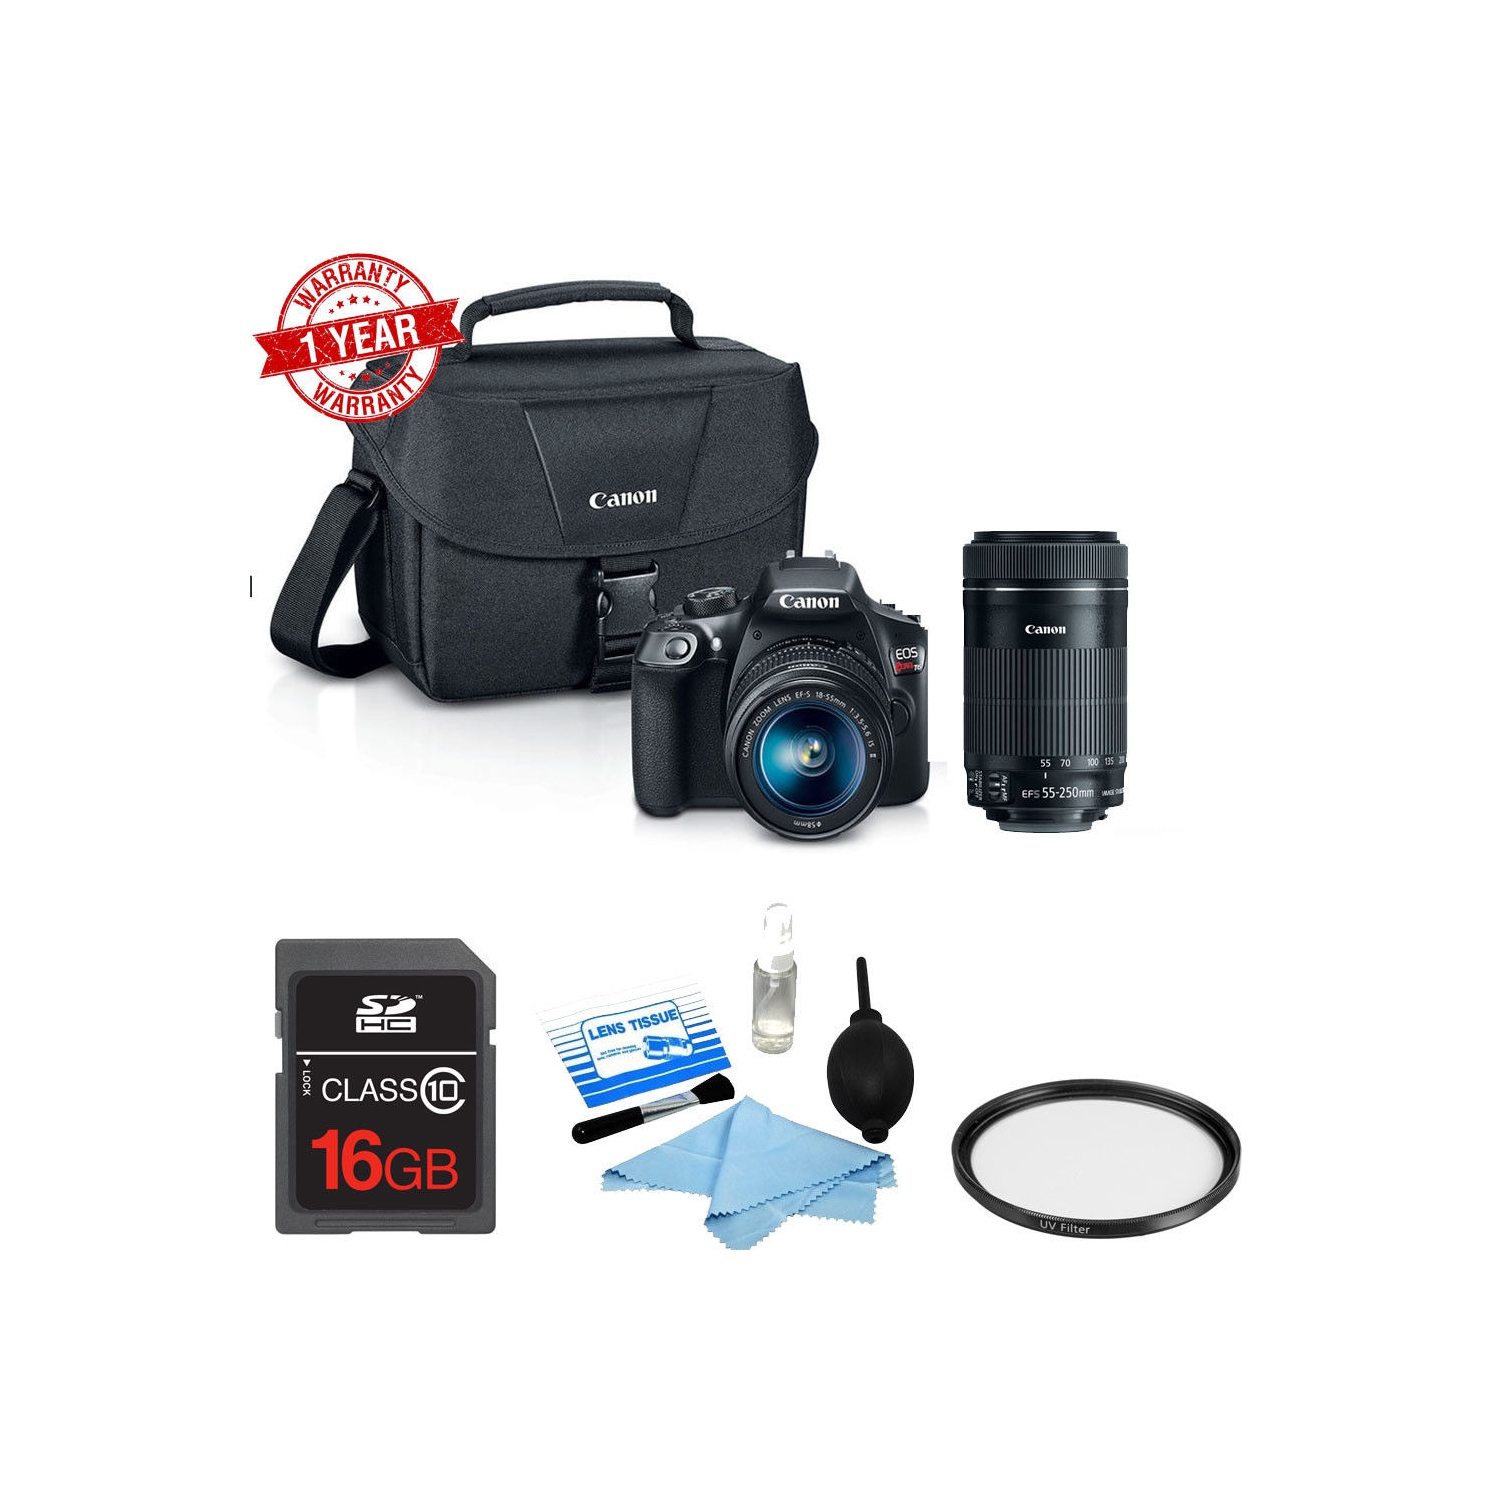 Canon EOS Rebel 1300D / T6 DSLR Camera with 18-55mm and 55-250mm Lenses Kit - US Version w/ Seller Warranty